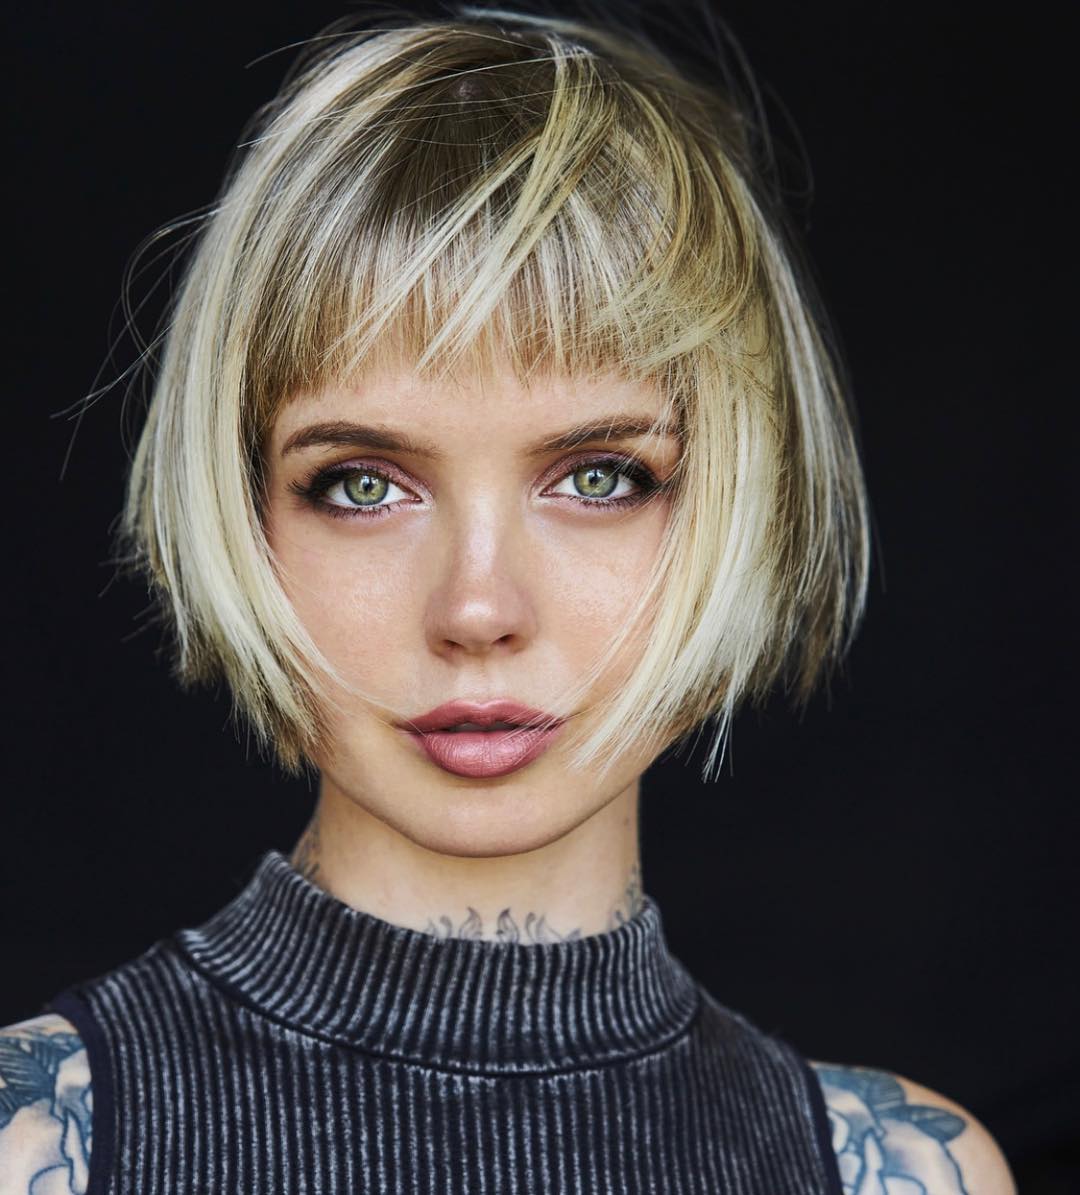 10 Trendy Messy Bob Hairstyles And Haircuts 2020 Female Short